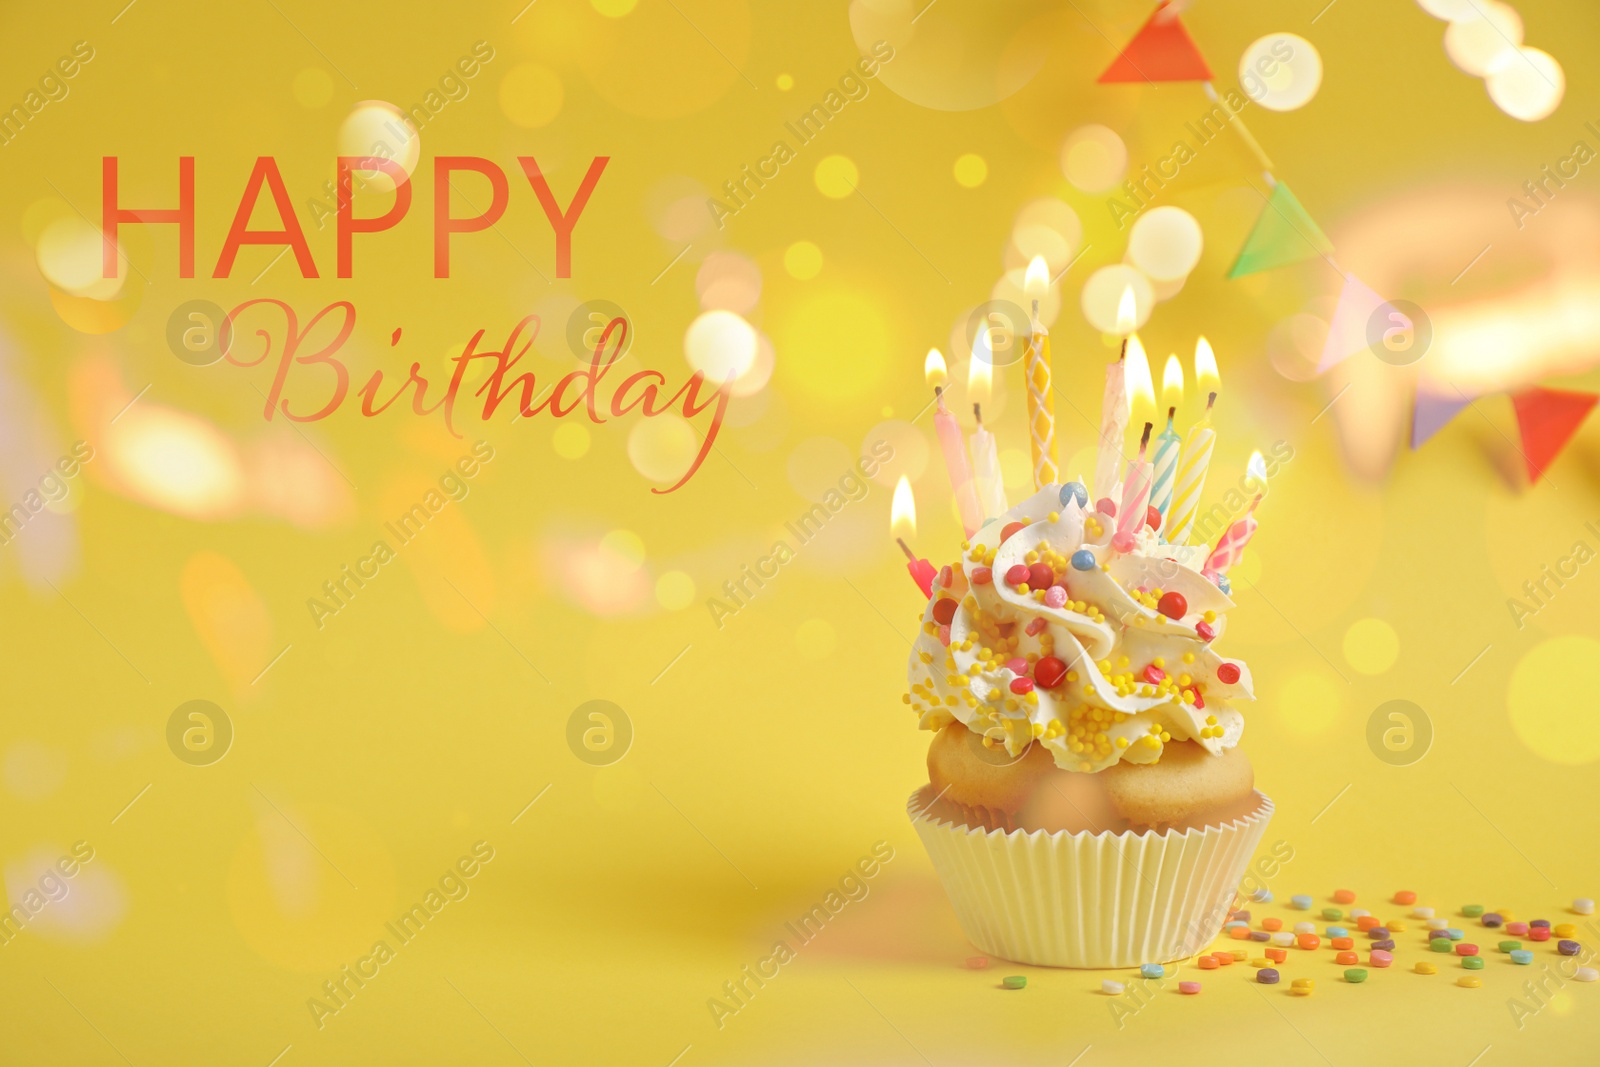 Image of Delicious cupcake with candles on yellow background. Happy Birthday